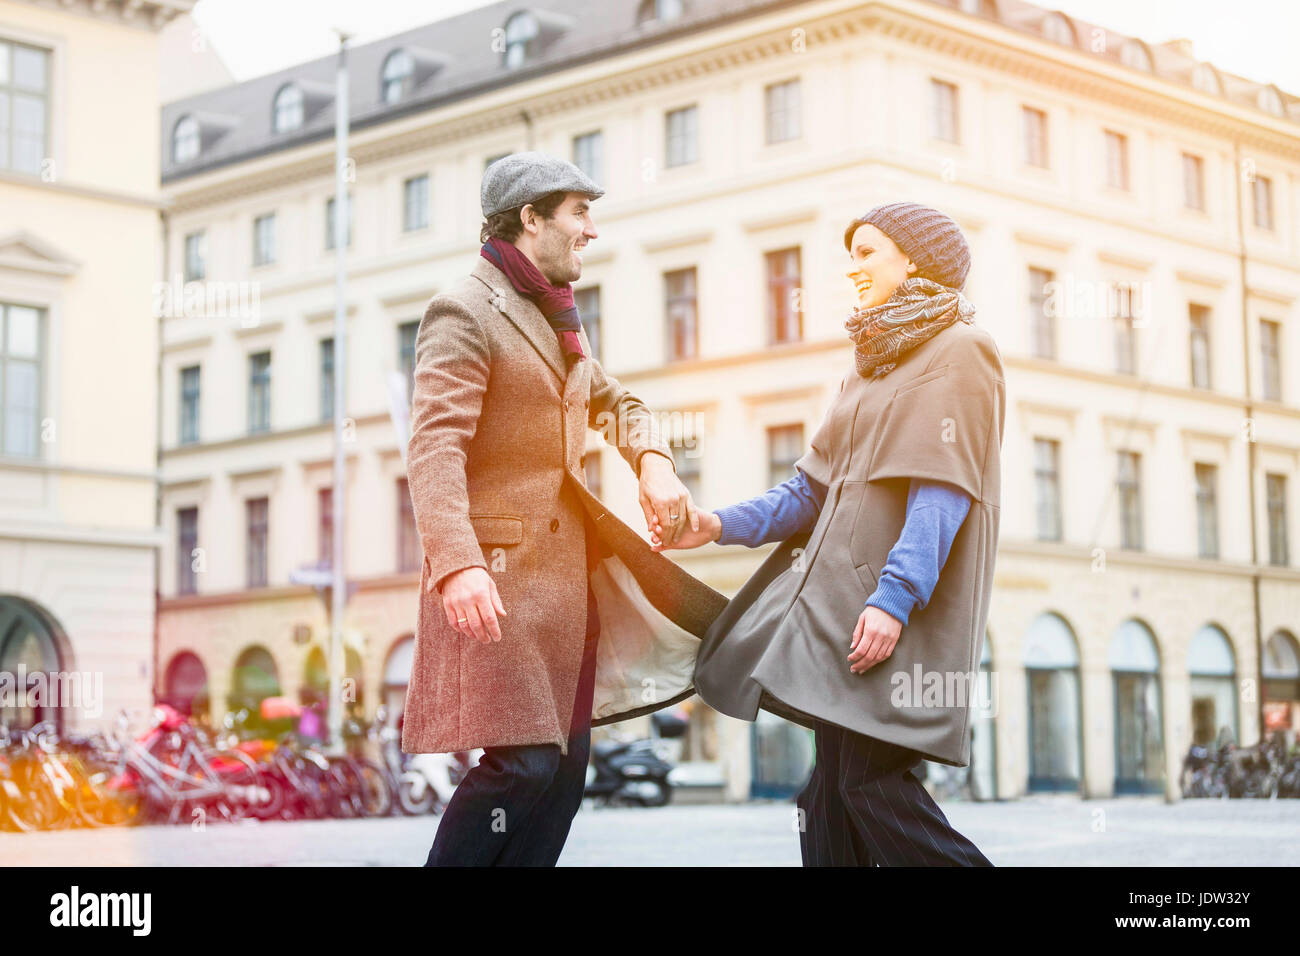 Couple holding hands on city street Stock Photo